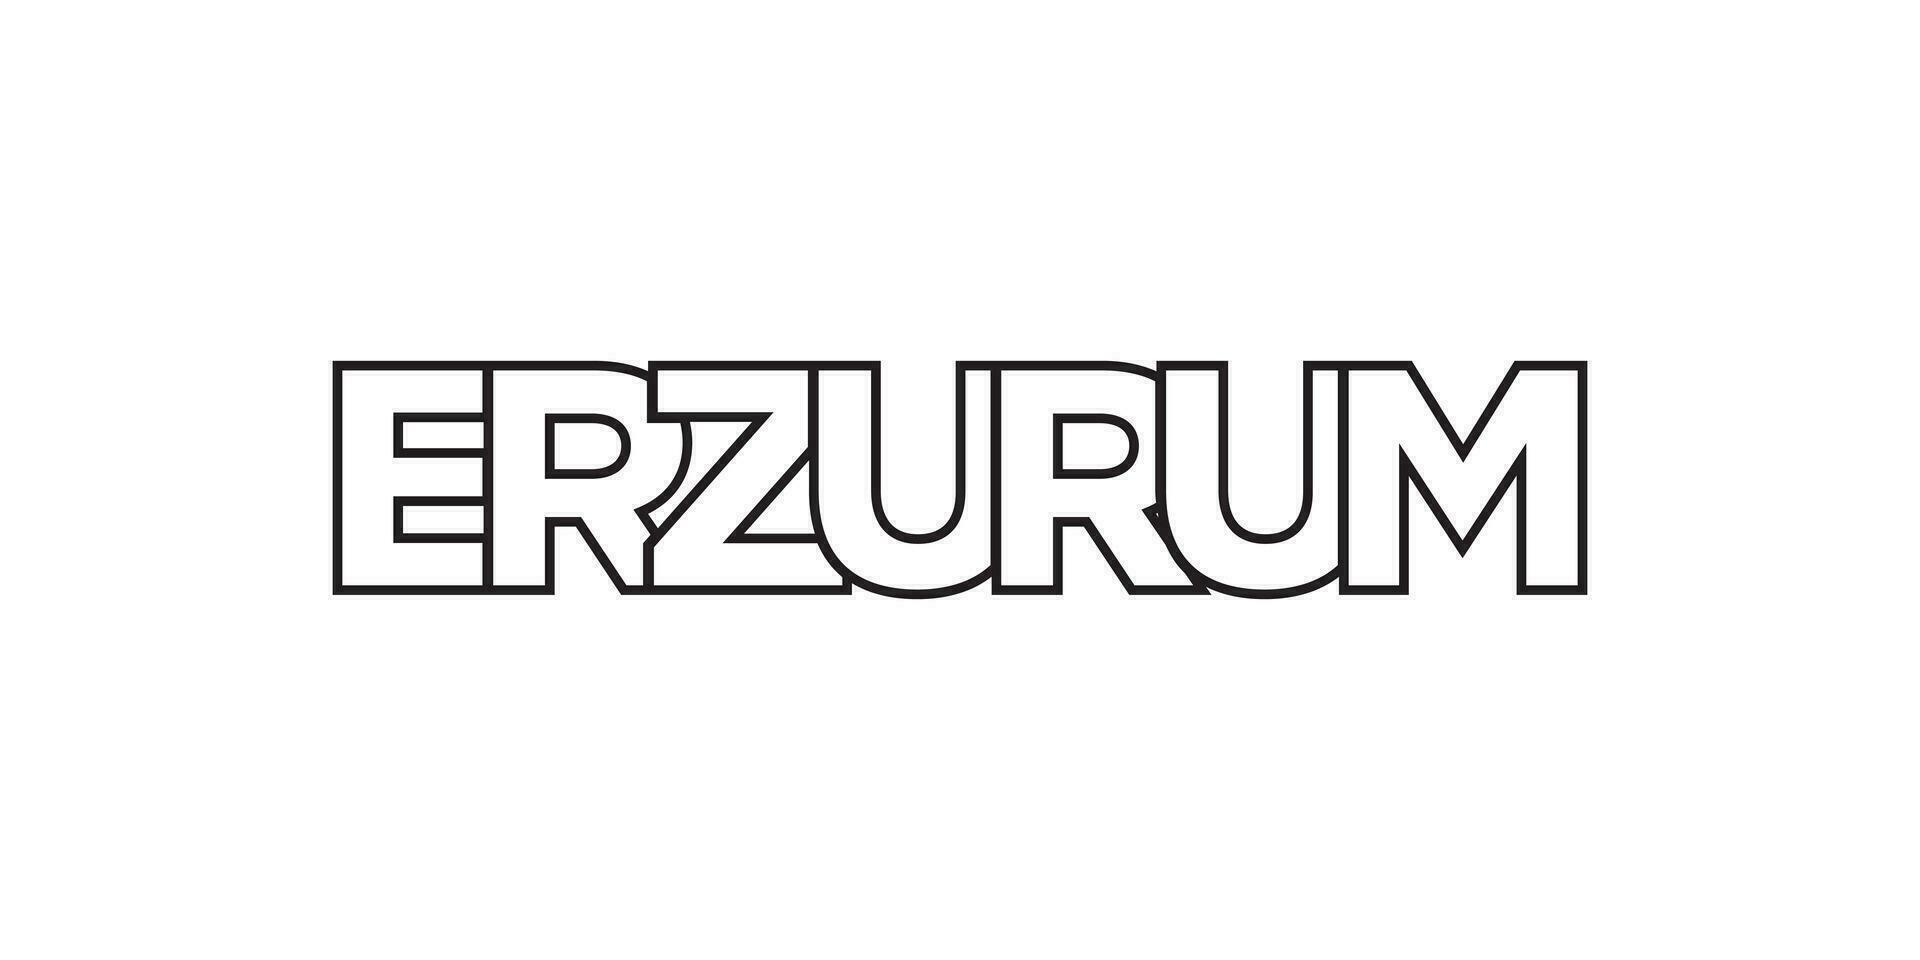 Erzurum in the Turkey emblem. The design features a geometric style, vector illustration with bold typography in a modern font. The graphic slogan lettering.